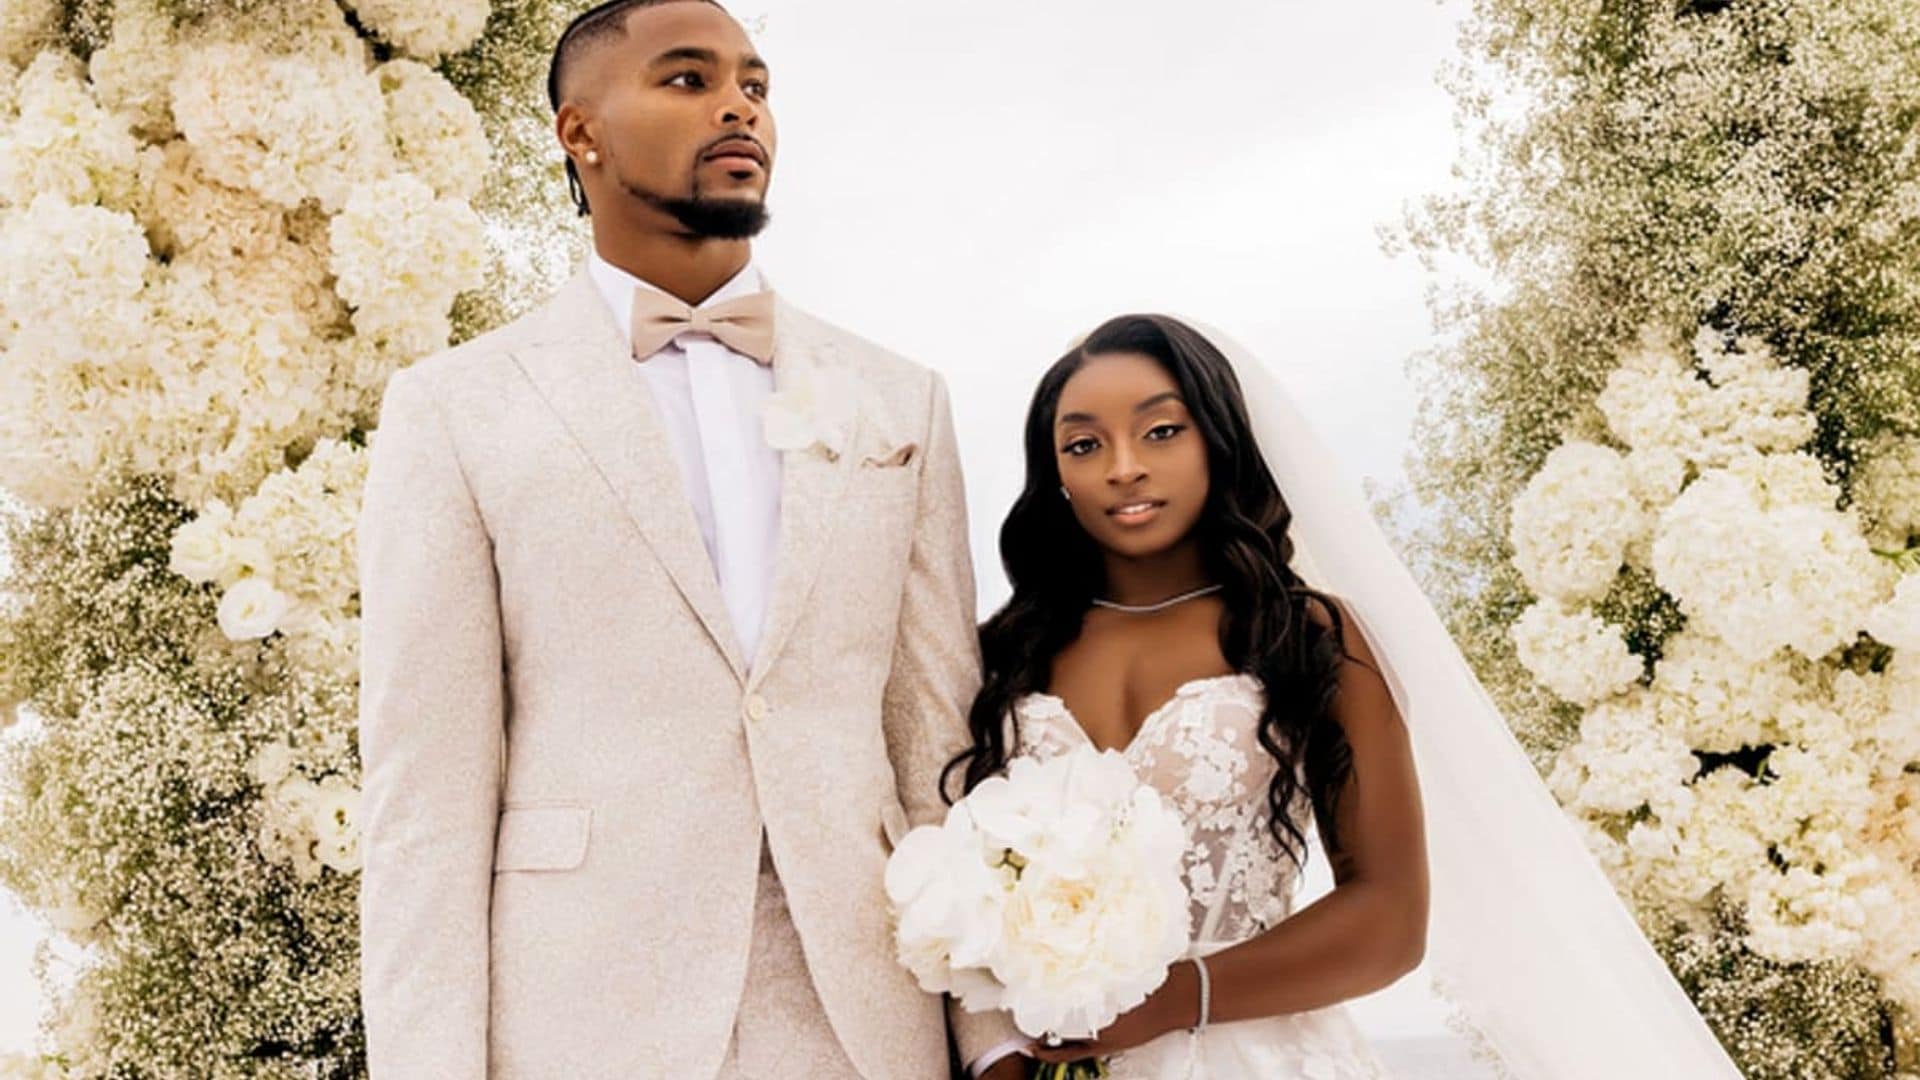 Check out Simone Biles’ stunning wedding gown sketches